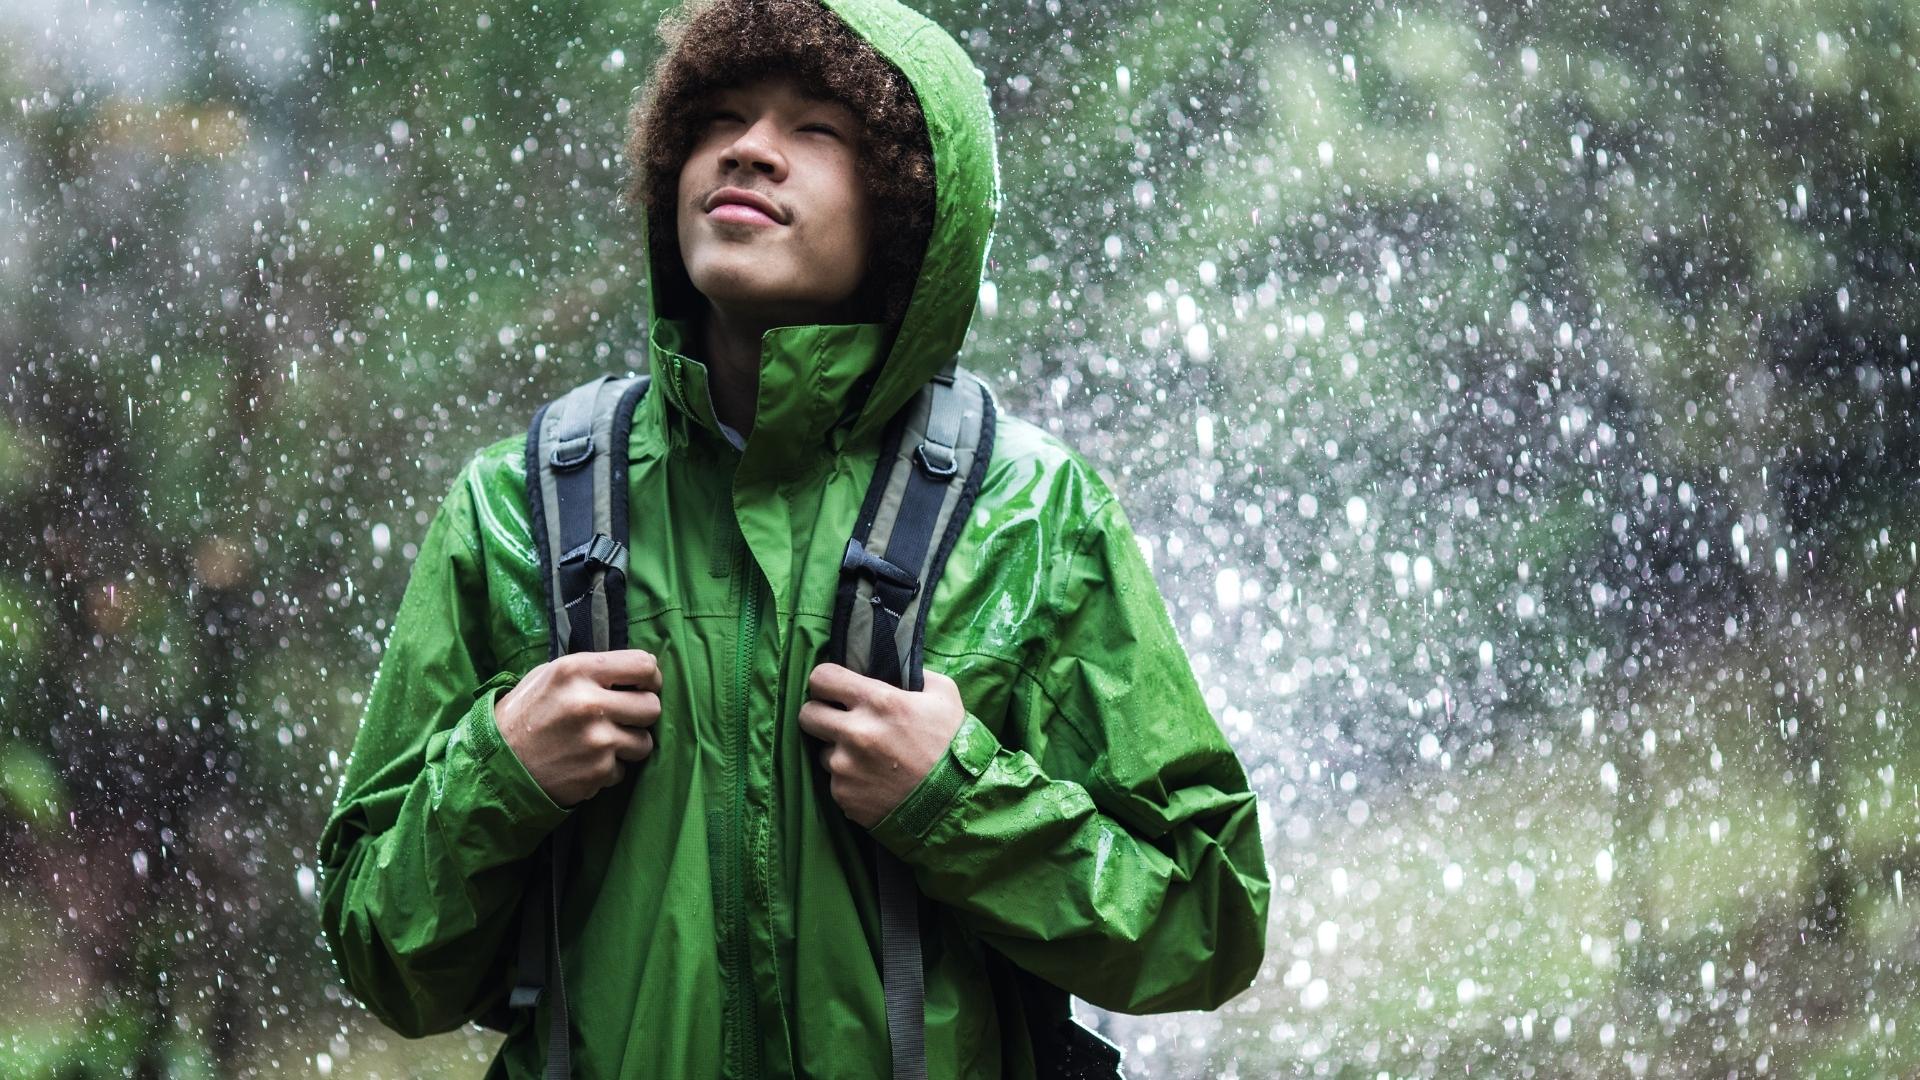 the Best Tips for Shooting in the Rain